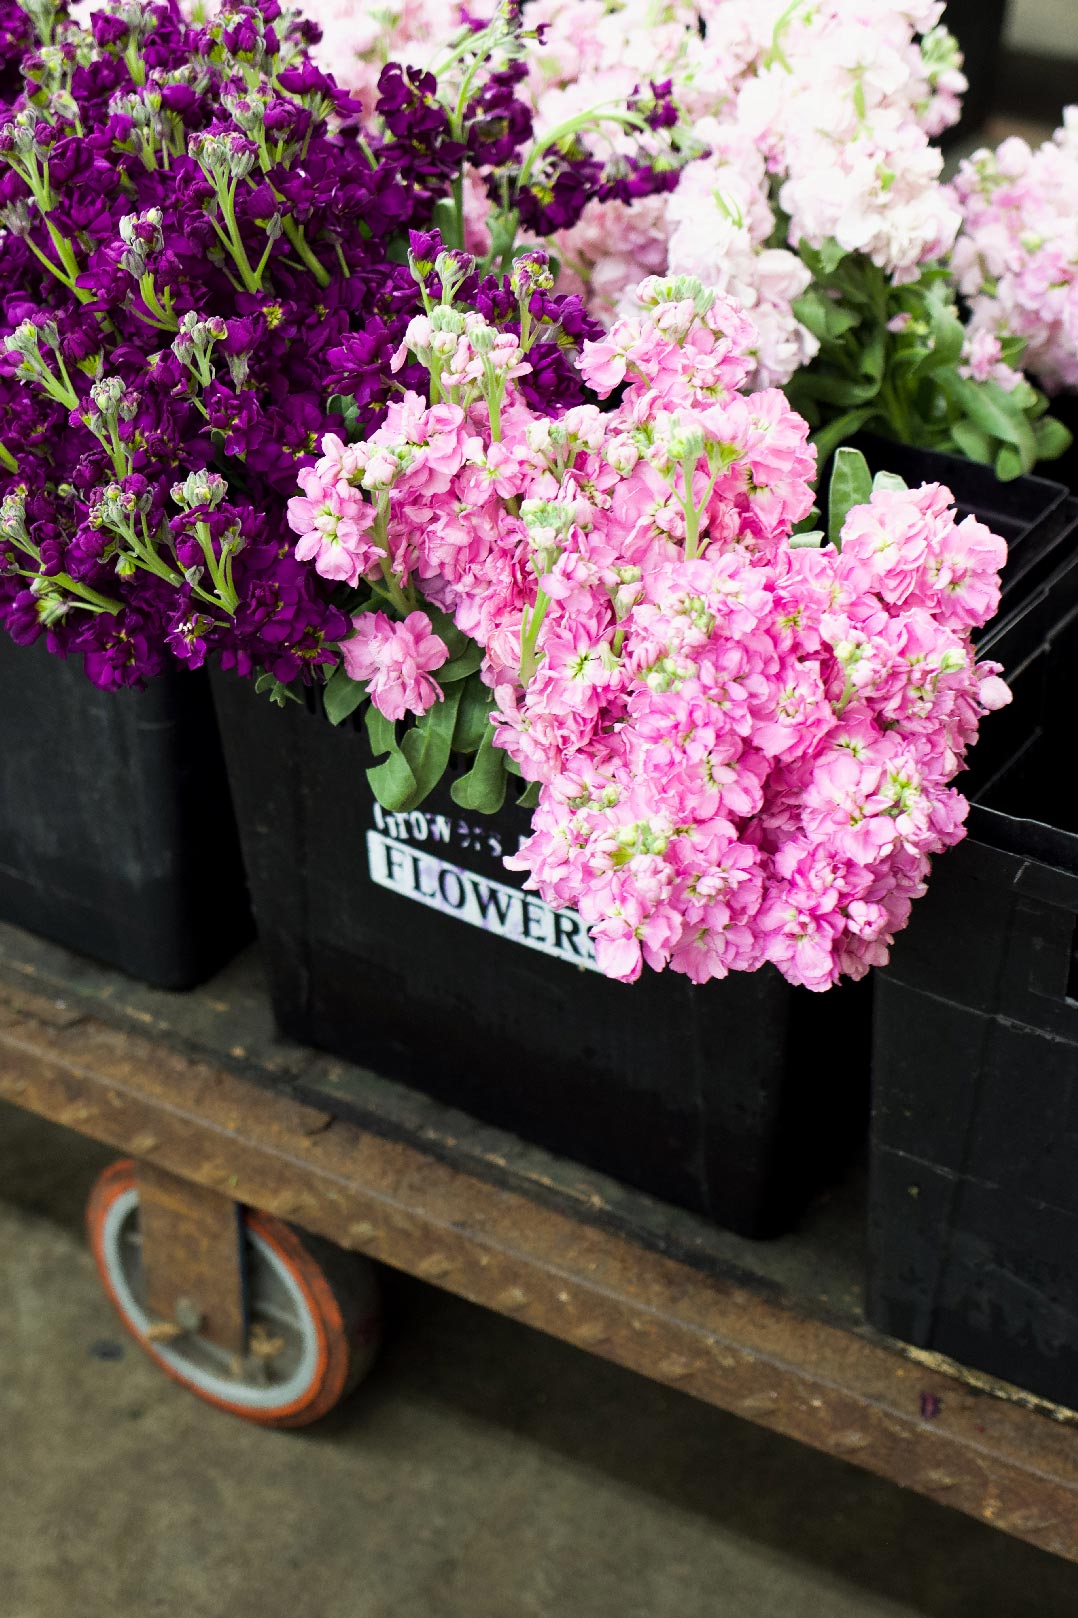 Bright pink, purple and white flowers on display in the market